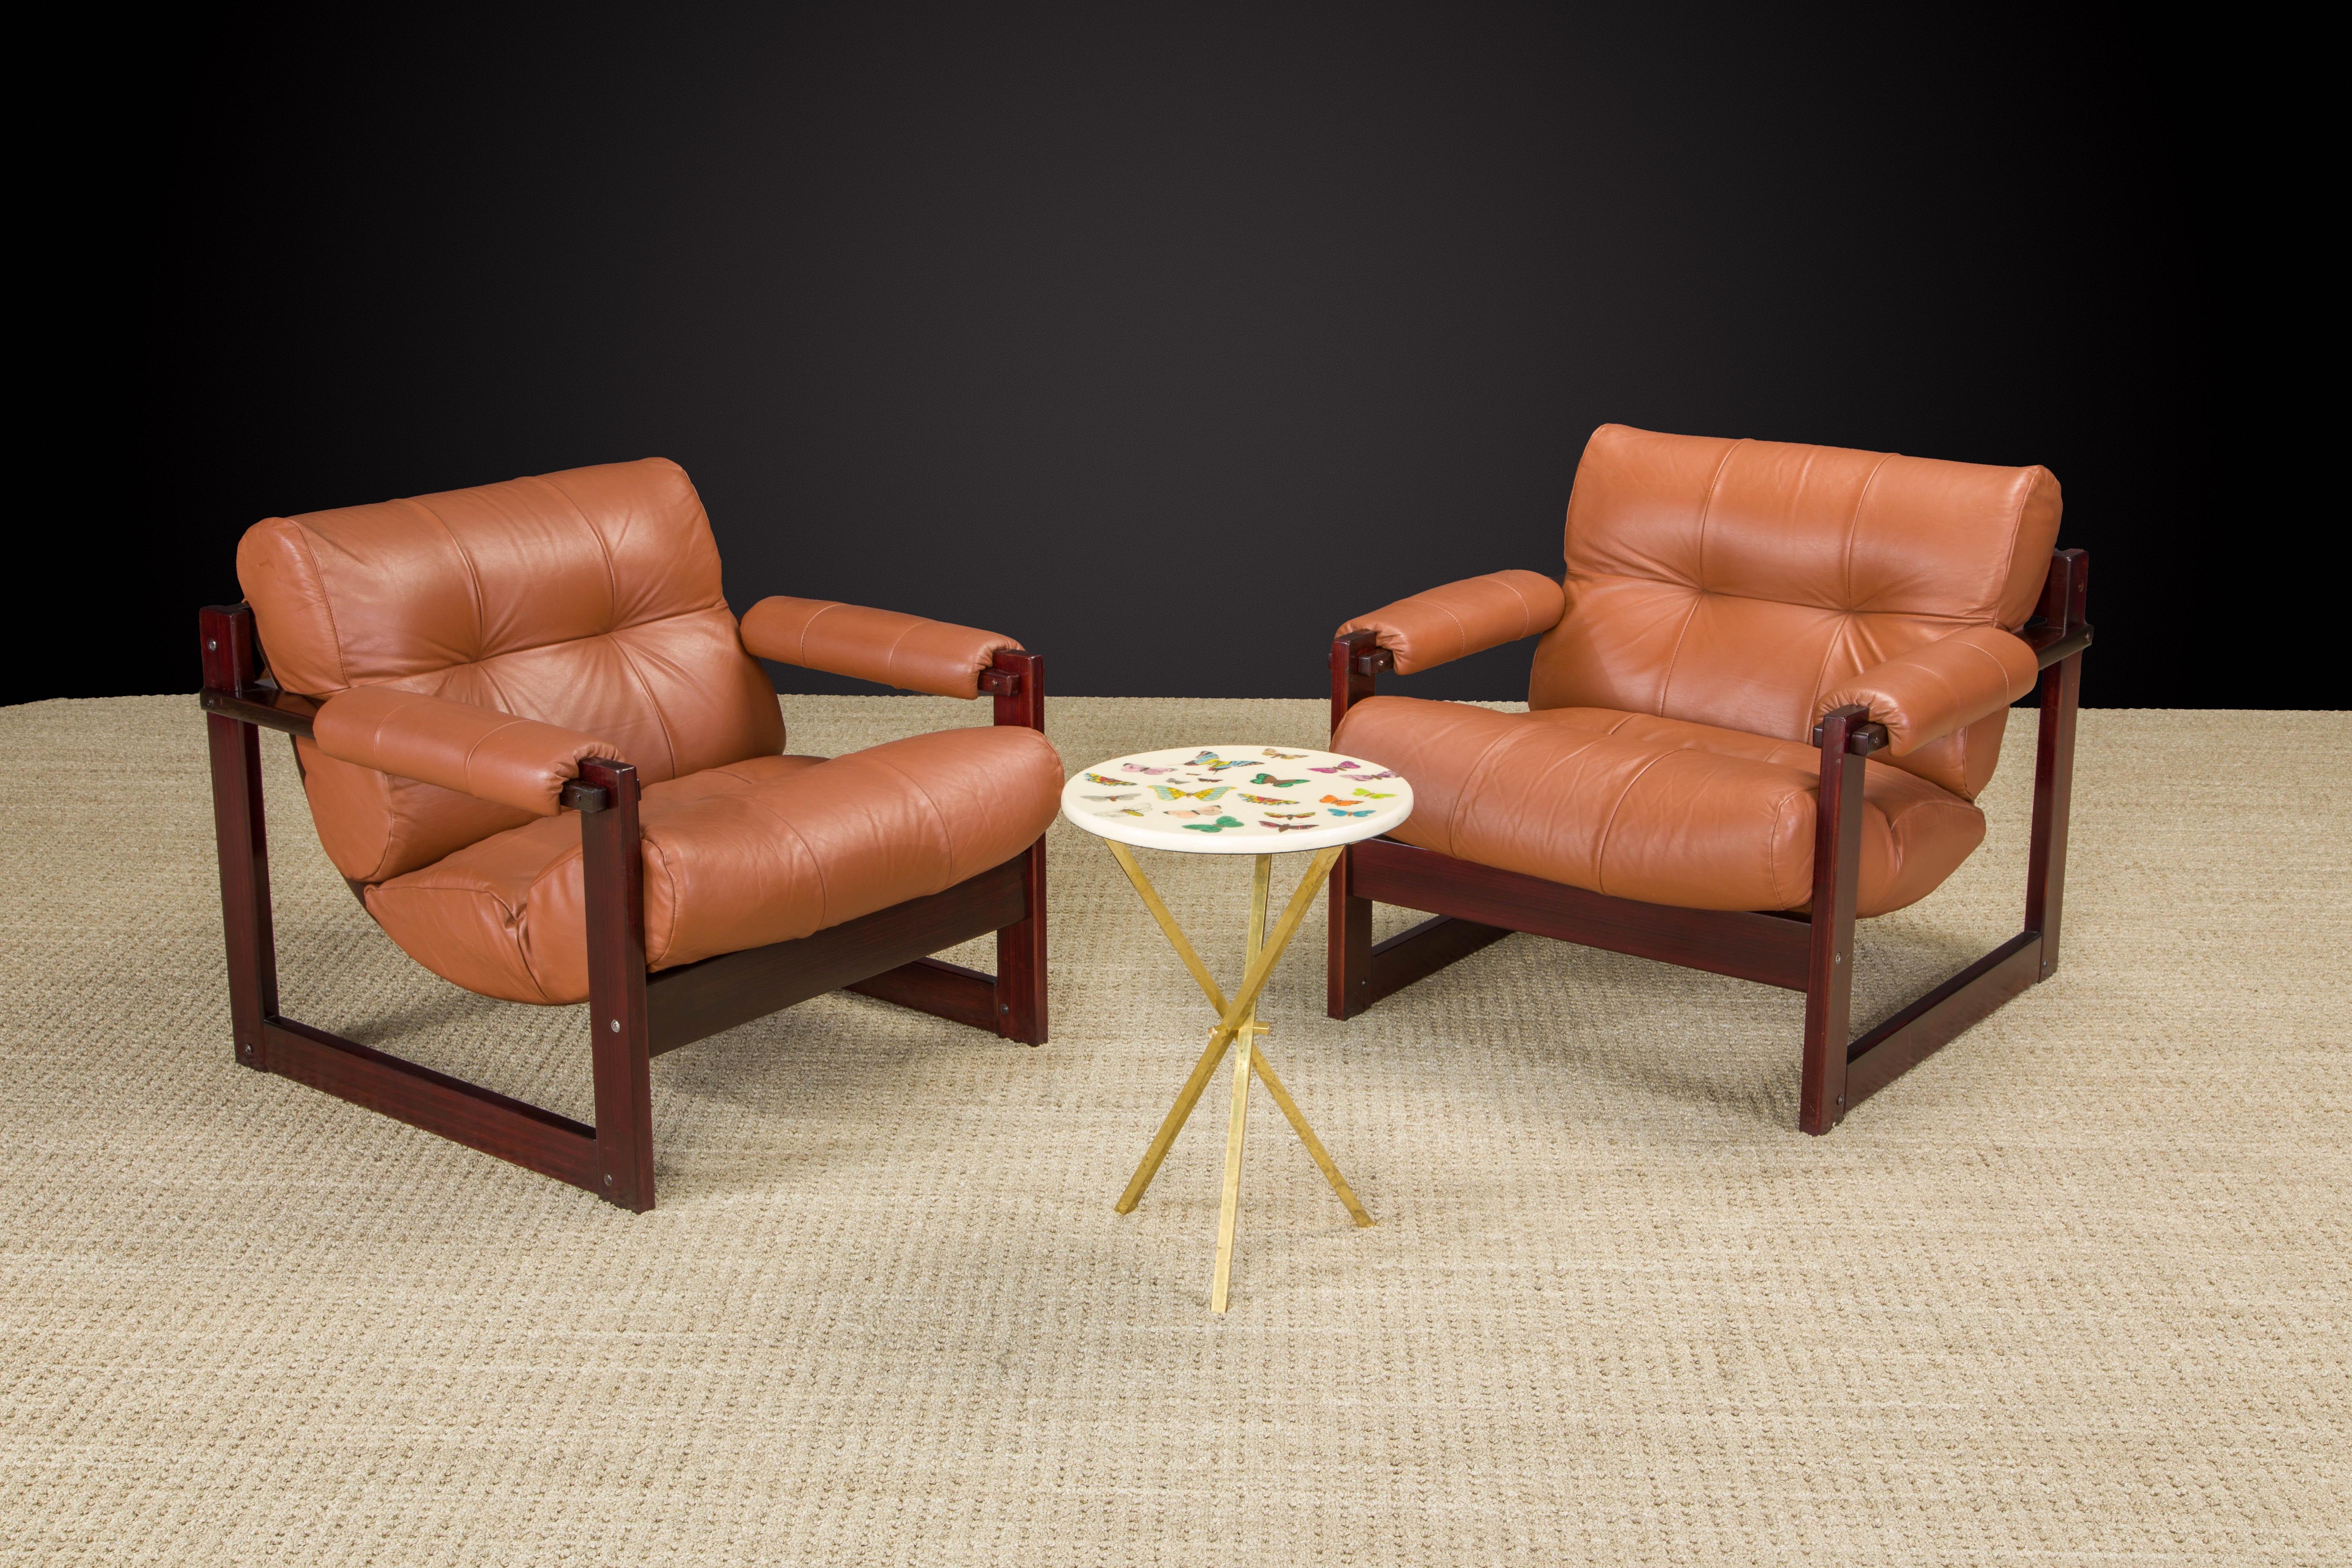 This gorgeous restored pair of 'S-1' cognac-color leather lounge chairs by Brazilian designer Percival Lafer for Lafer MP.  This set was designed in 1976 and was Lafer's concept of merging Brazilian design with Scandinavian sensibility - the sling